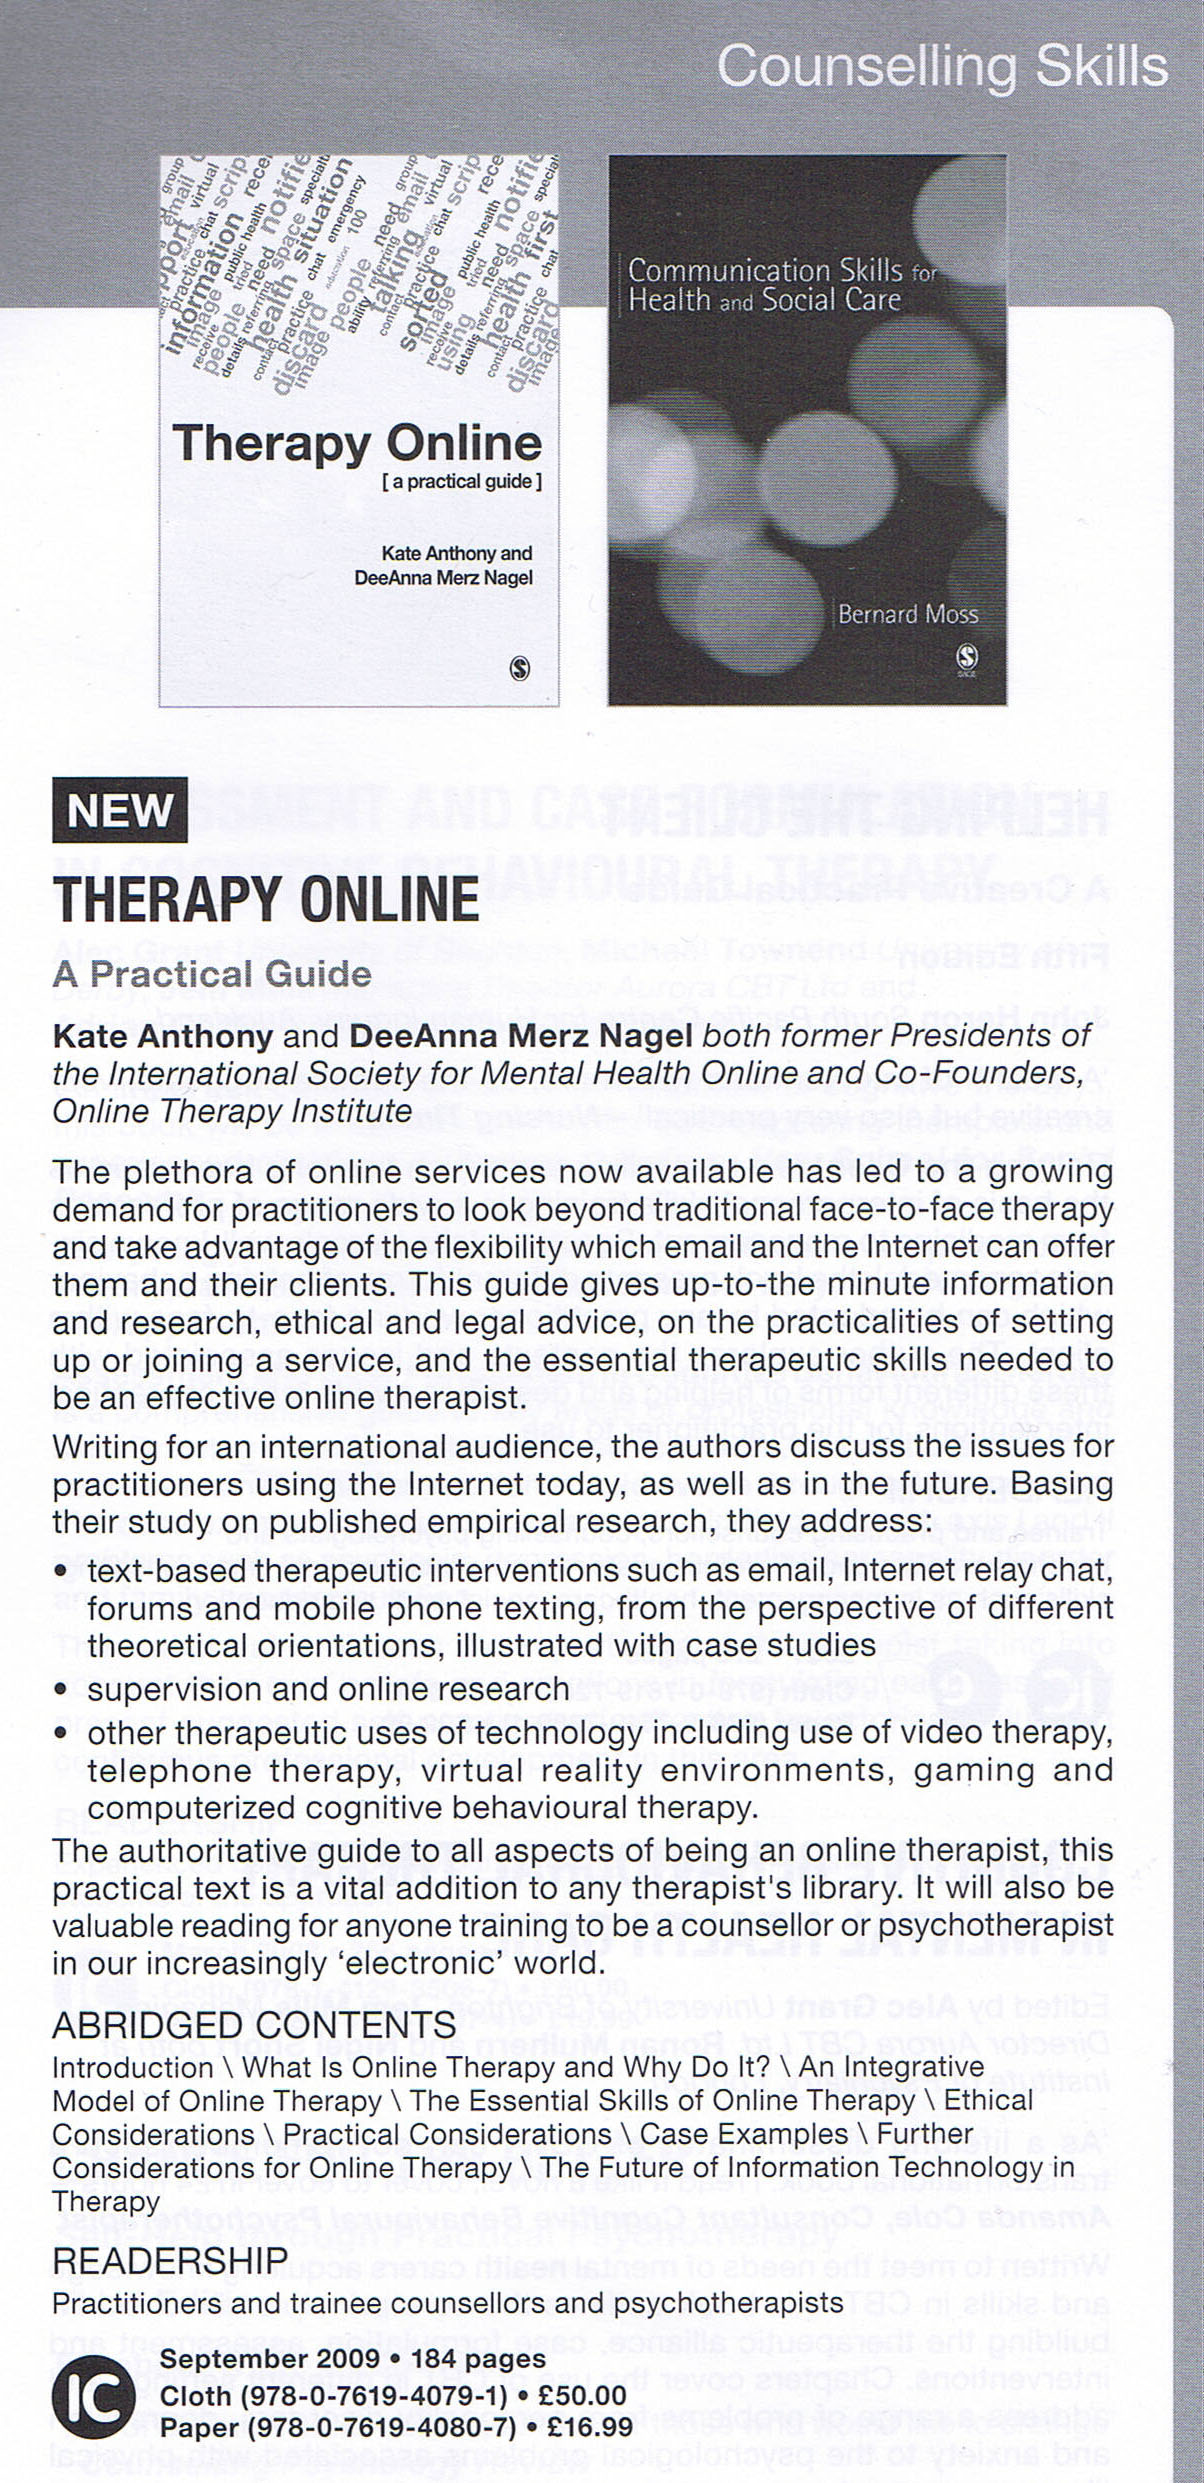 Therapy Online [A Practical Guide]